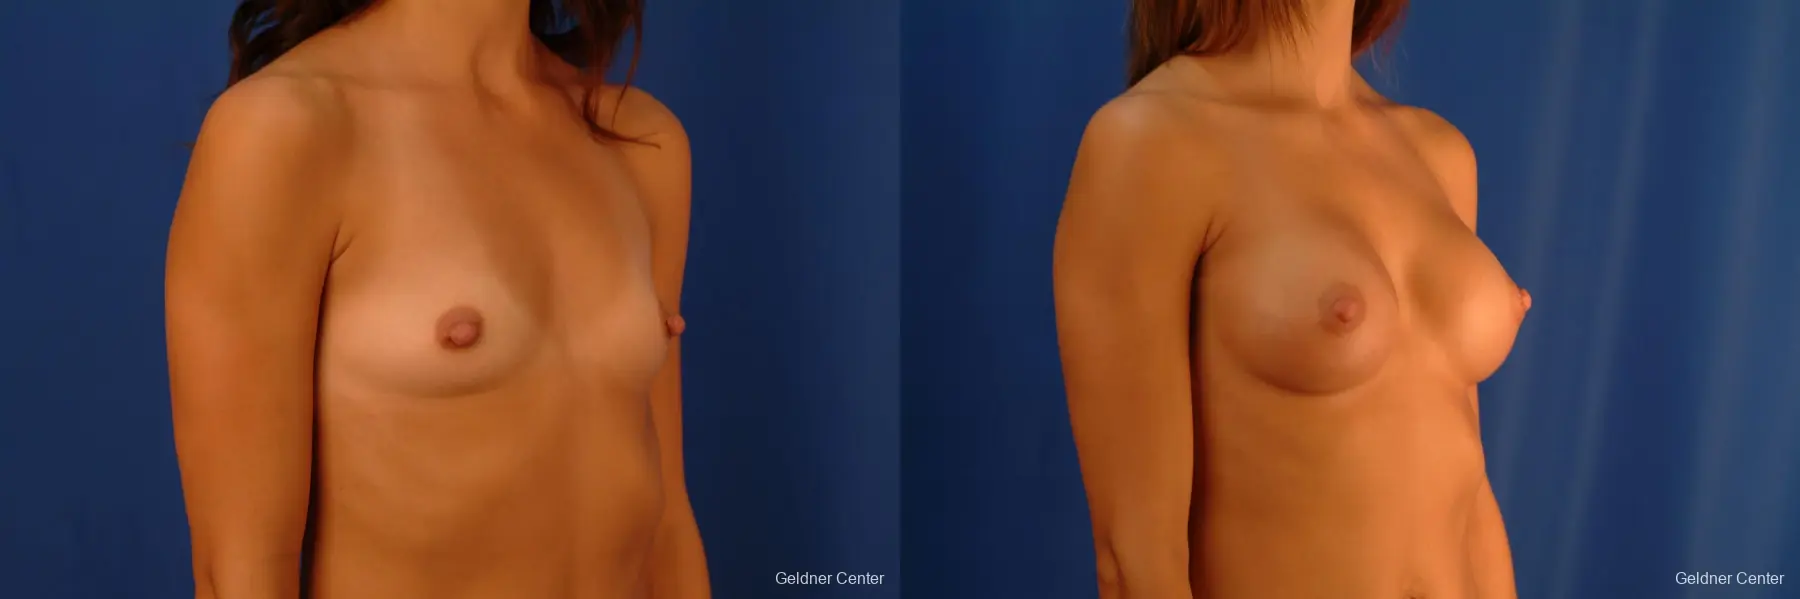 Breast Augmentation Hinsdale, Chicago 2412 - Before and After 3